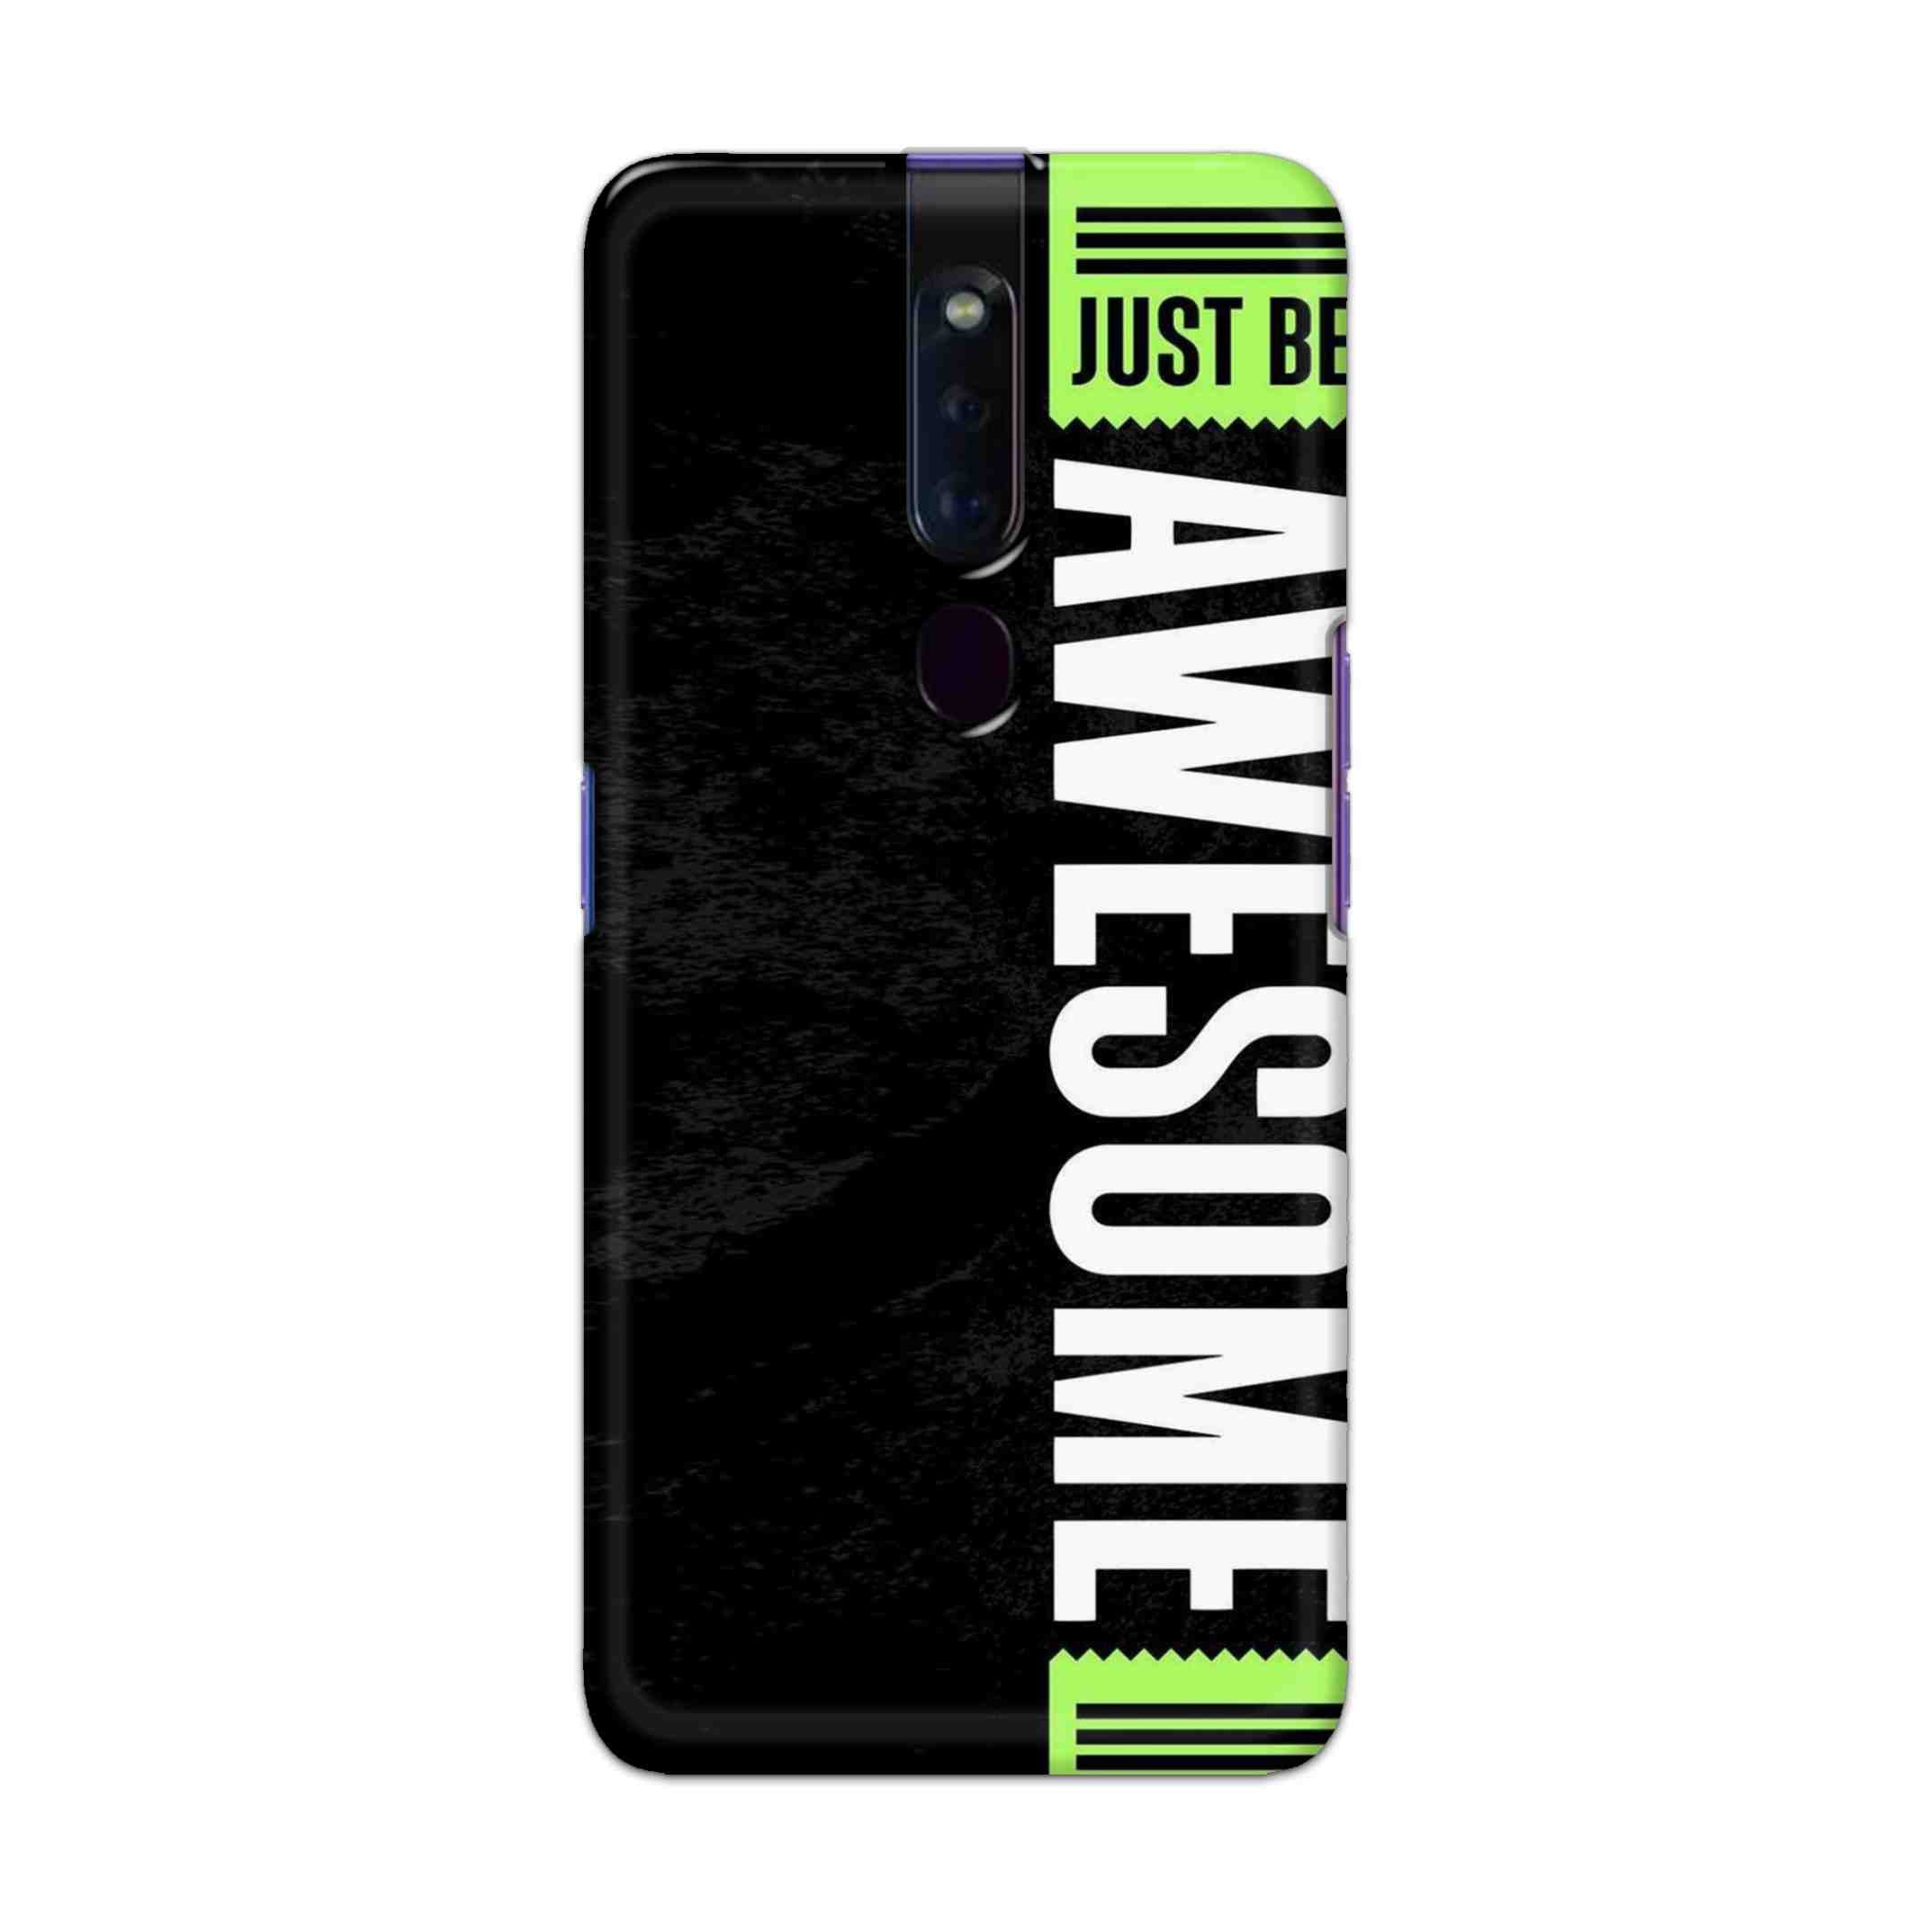 Buy Awesome Street Hard Back Mobile Phone Case Cover For Oppo F11 Pro Online